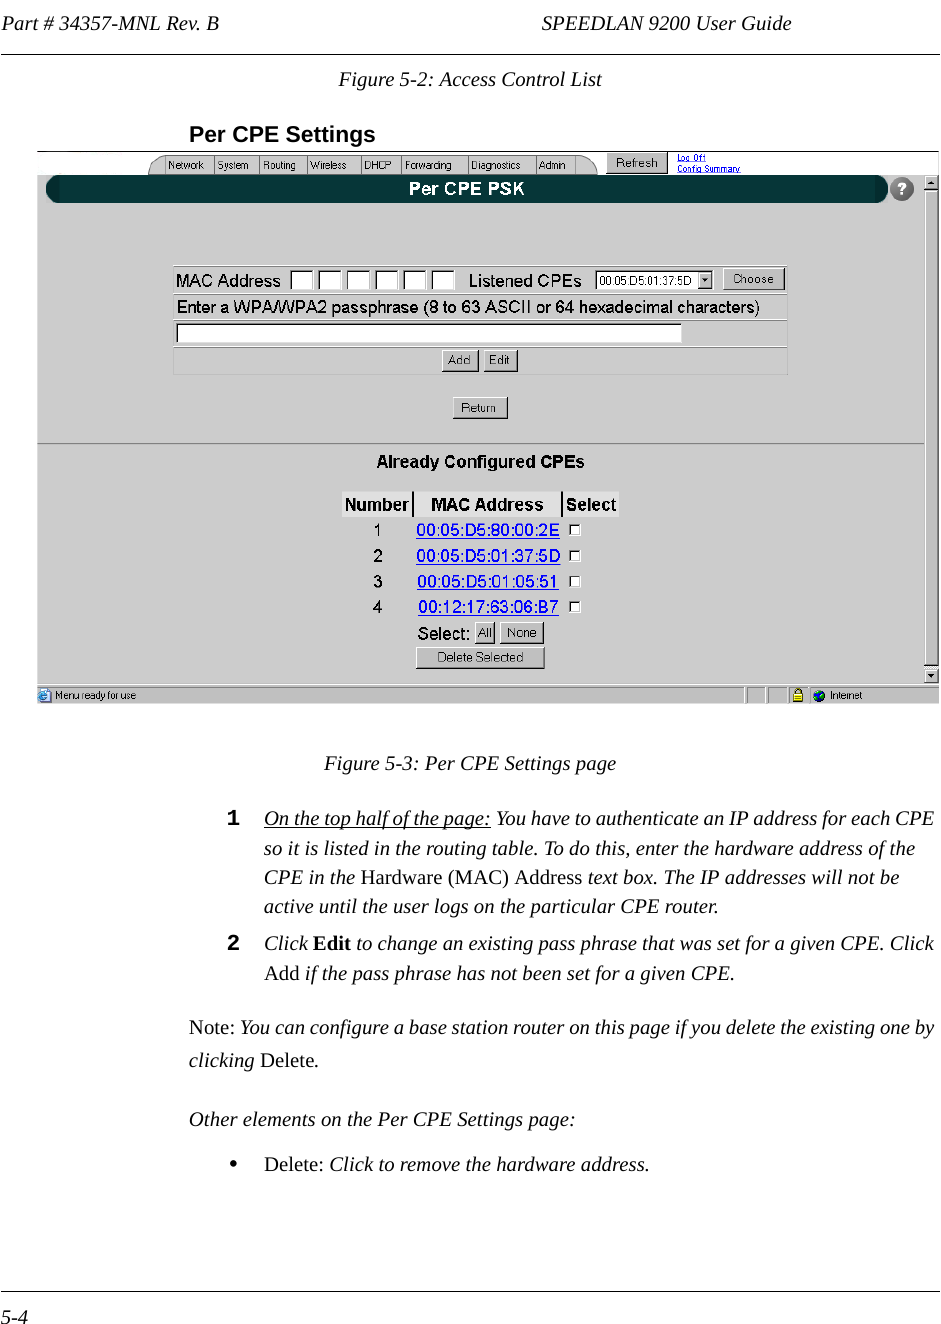 Part # 34357-MNL Rev. B                                                              SPEEDLAN 9200 User Guide 5-4Figure 5-2: Access Control ListPer CPE Settings  Figure 5-3: Per CPE Settings page1On the top half of the page: You have to authenticate an IP address for each CPE so it is listed in the routing table. To do this, enter the hardware address of the CPE in the Hardware (MAC) Address text box. The IP addresses will not be active until the user logs on the particular CPE router.2Click Edit to change an existing pass phrase that was set for a given CPE. Click Add if the pass phrase has not been set for a given CPE.Note: You can configure a base station router on this page if you delete the existing one by clicking Delete.Other elements on the Per CPE Settings page:•Delete: Click to remove the hardware address. 